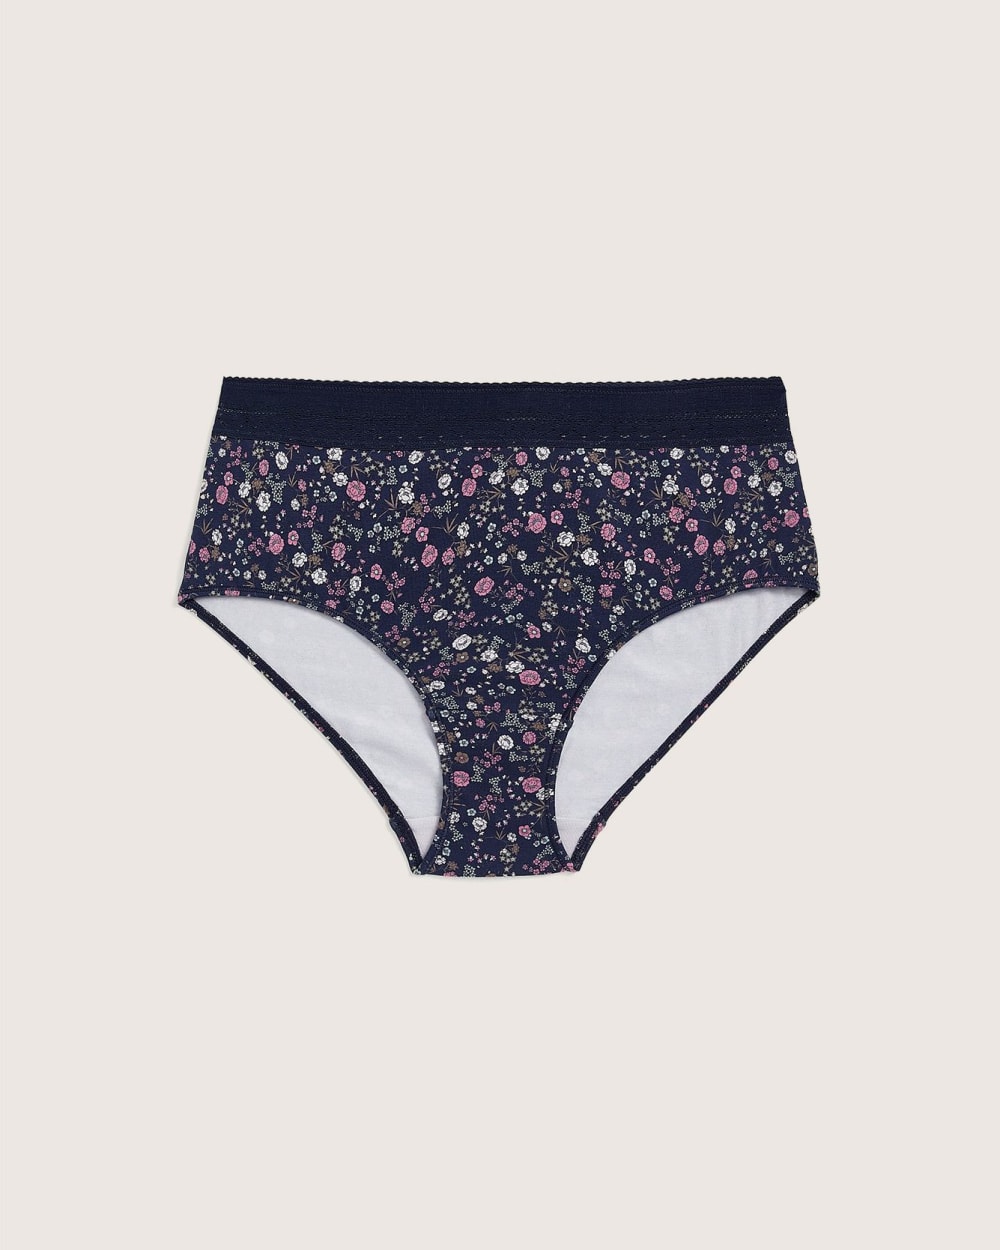 Printed Full Brief with Lace Waistband - tiVOGLIO